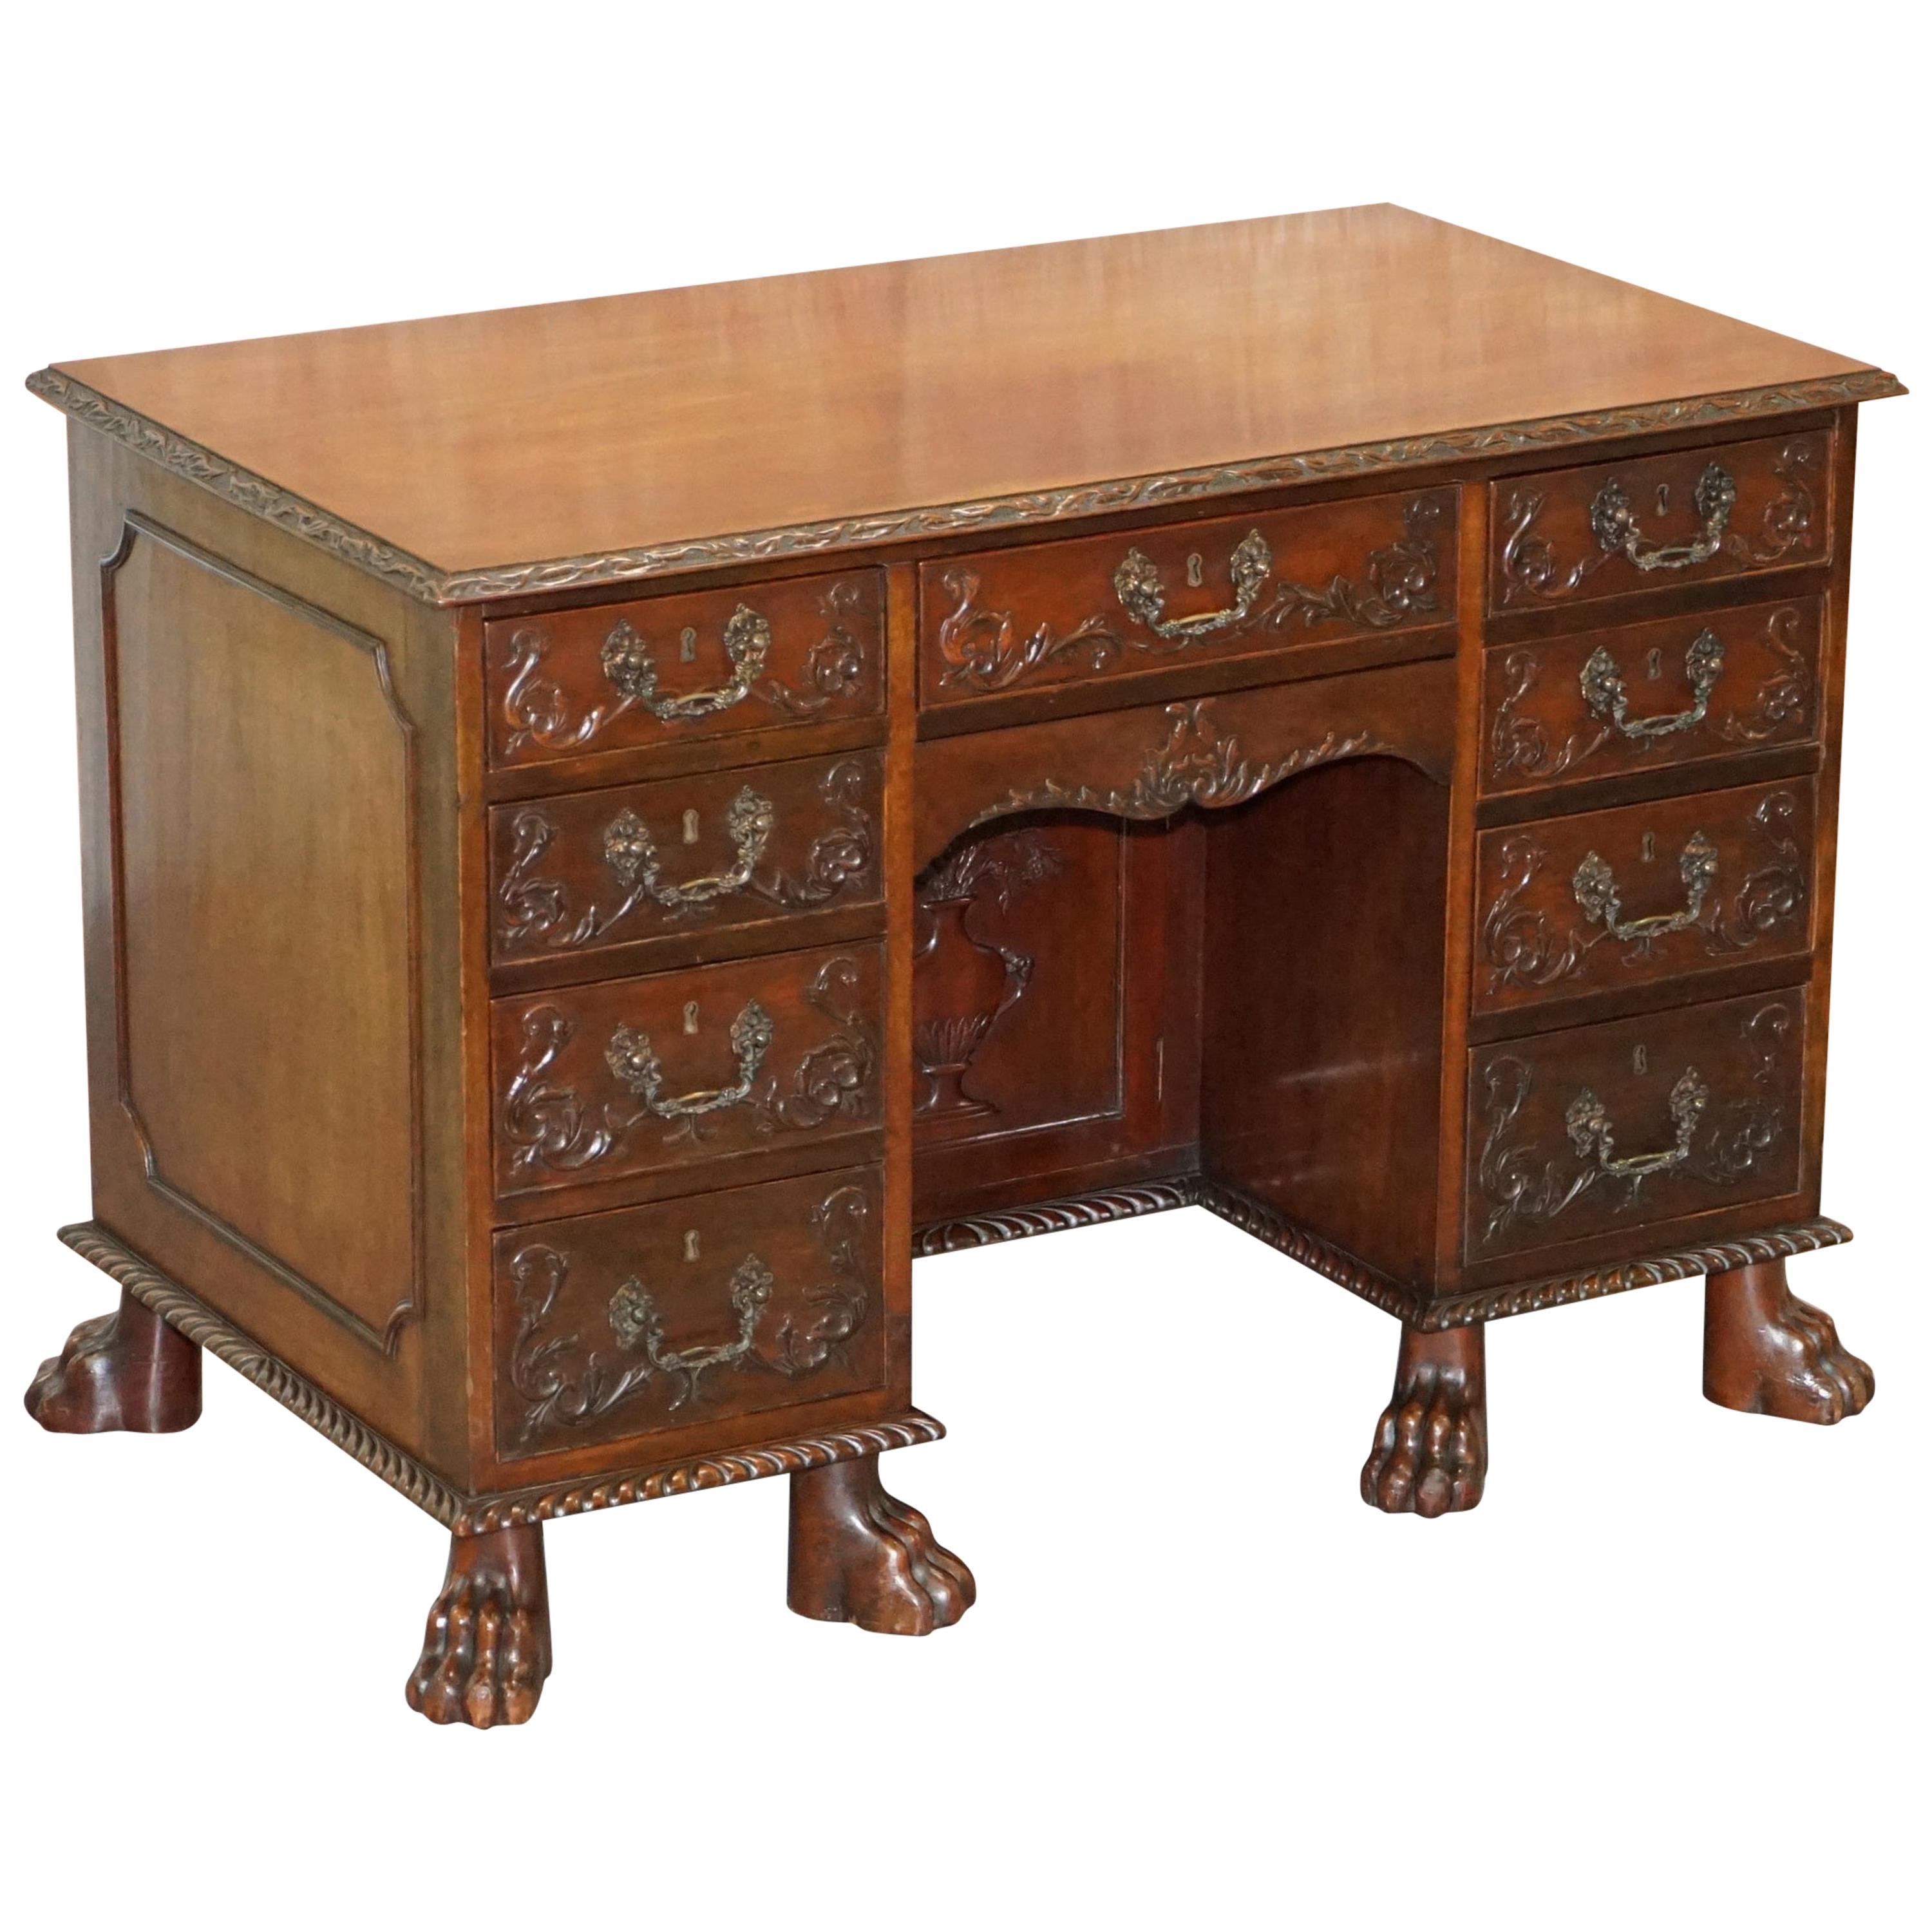 Sublime Hand Carved from Top to Bottom Antique Victorian 1850 Knee Hole Desk For Sale